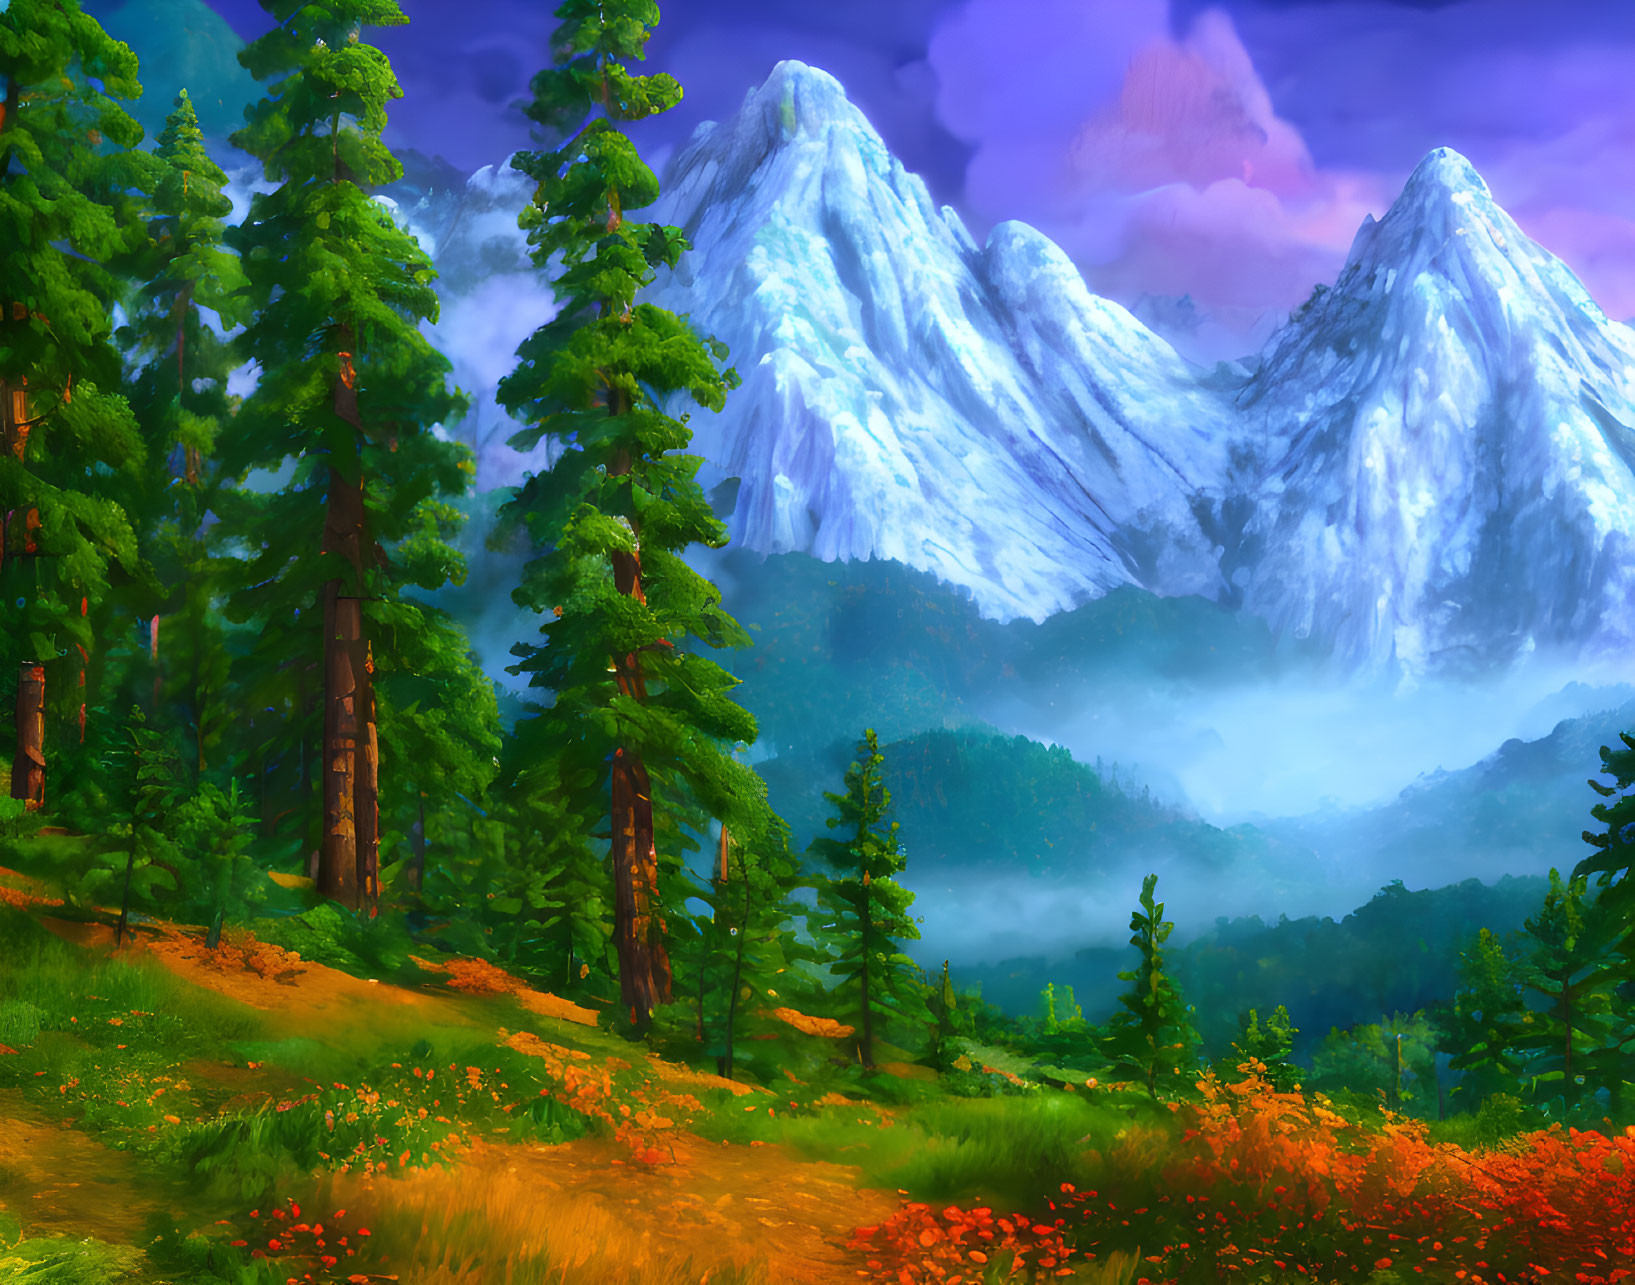 Snowy mountains, pine trees, red flowers: Vibrant landscape scenery.